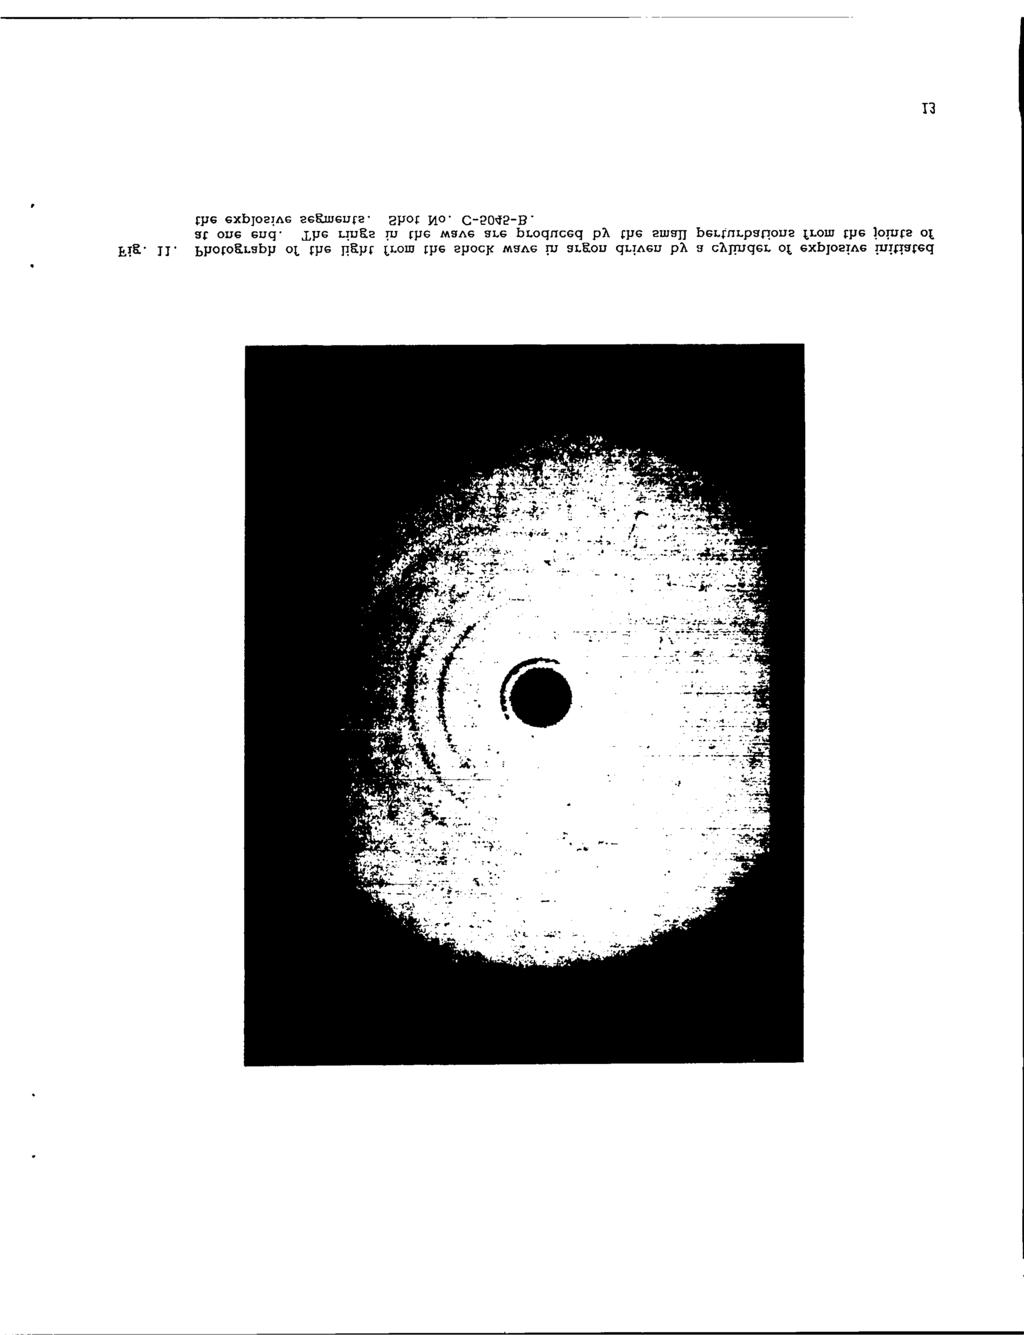 , Fig 11 Photograph of the light from the shock wave in argon driven by a cylinder of explosive initiated at one end